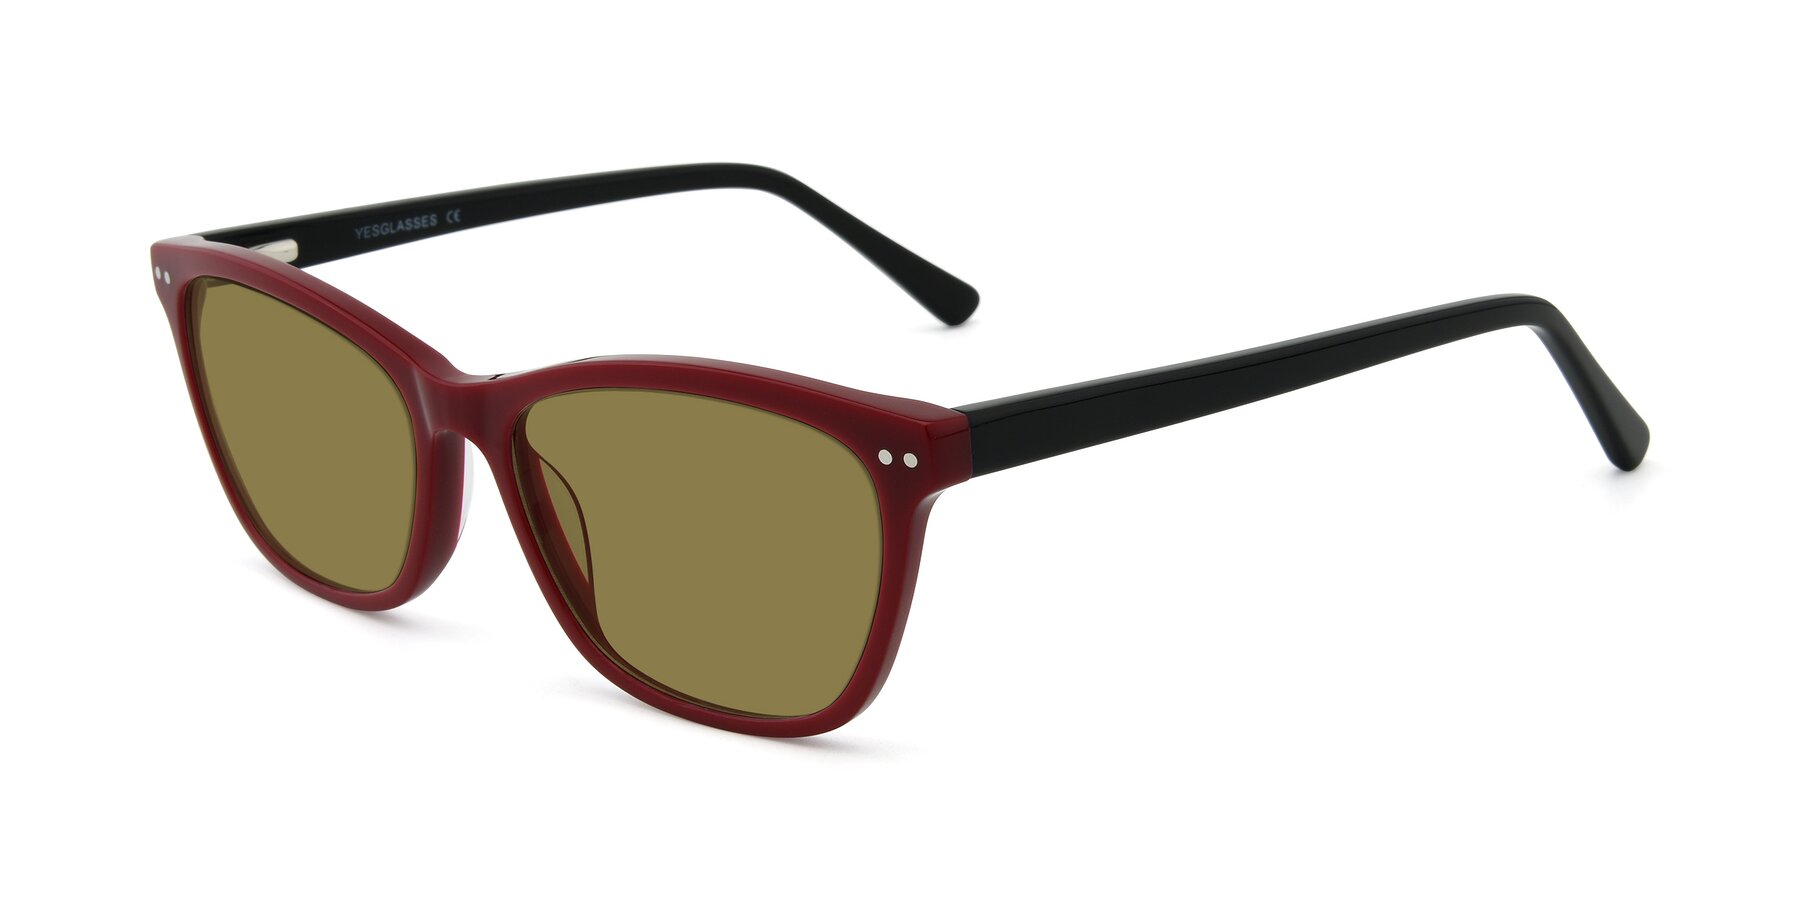 Angle of 17350 in Wine with Brown Polarized Lenses